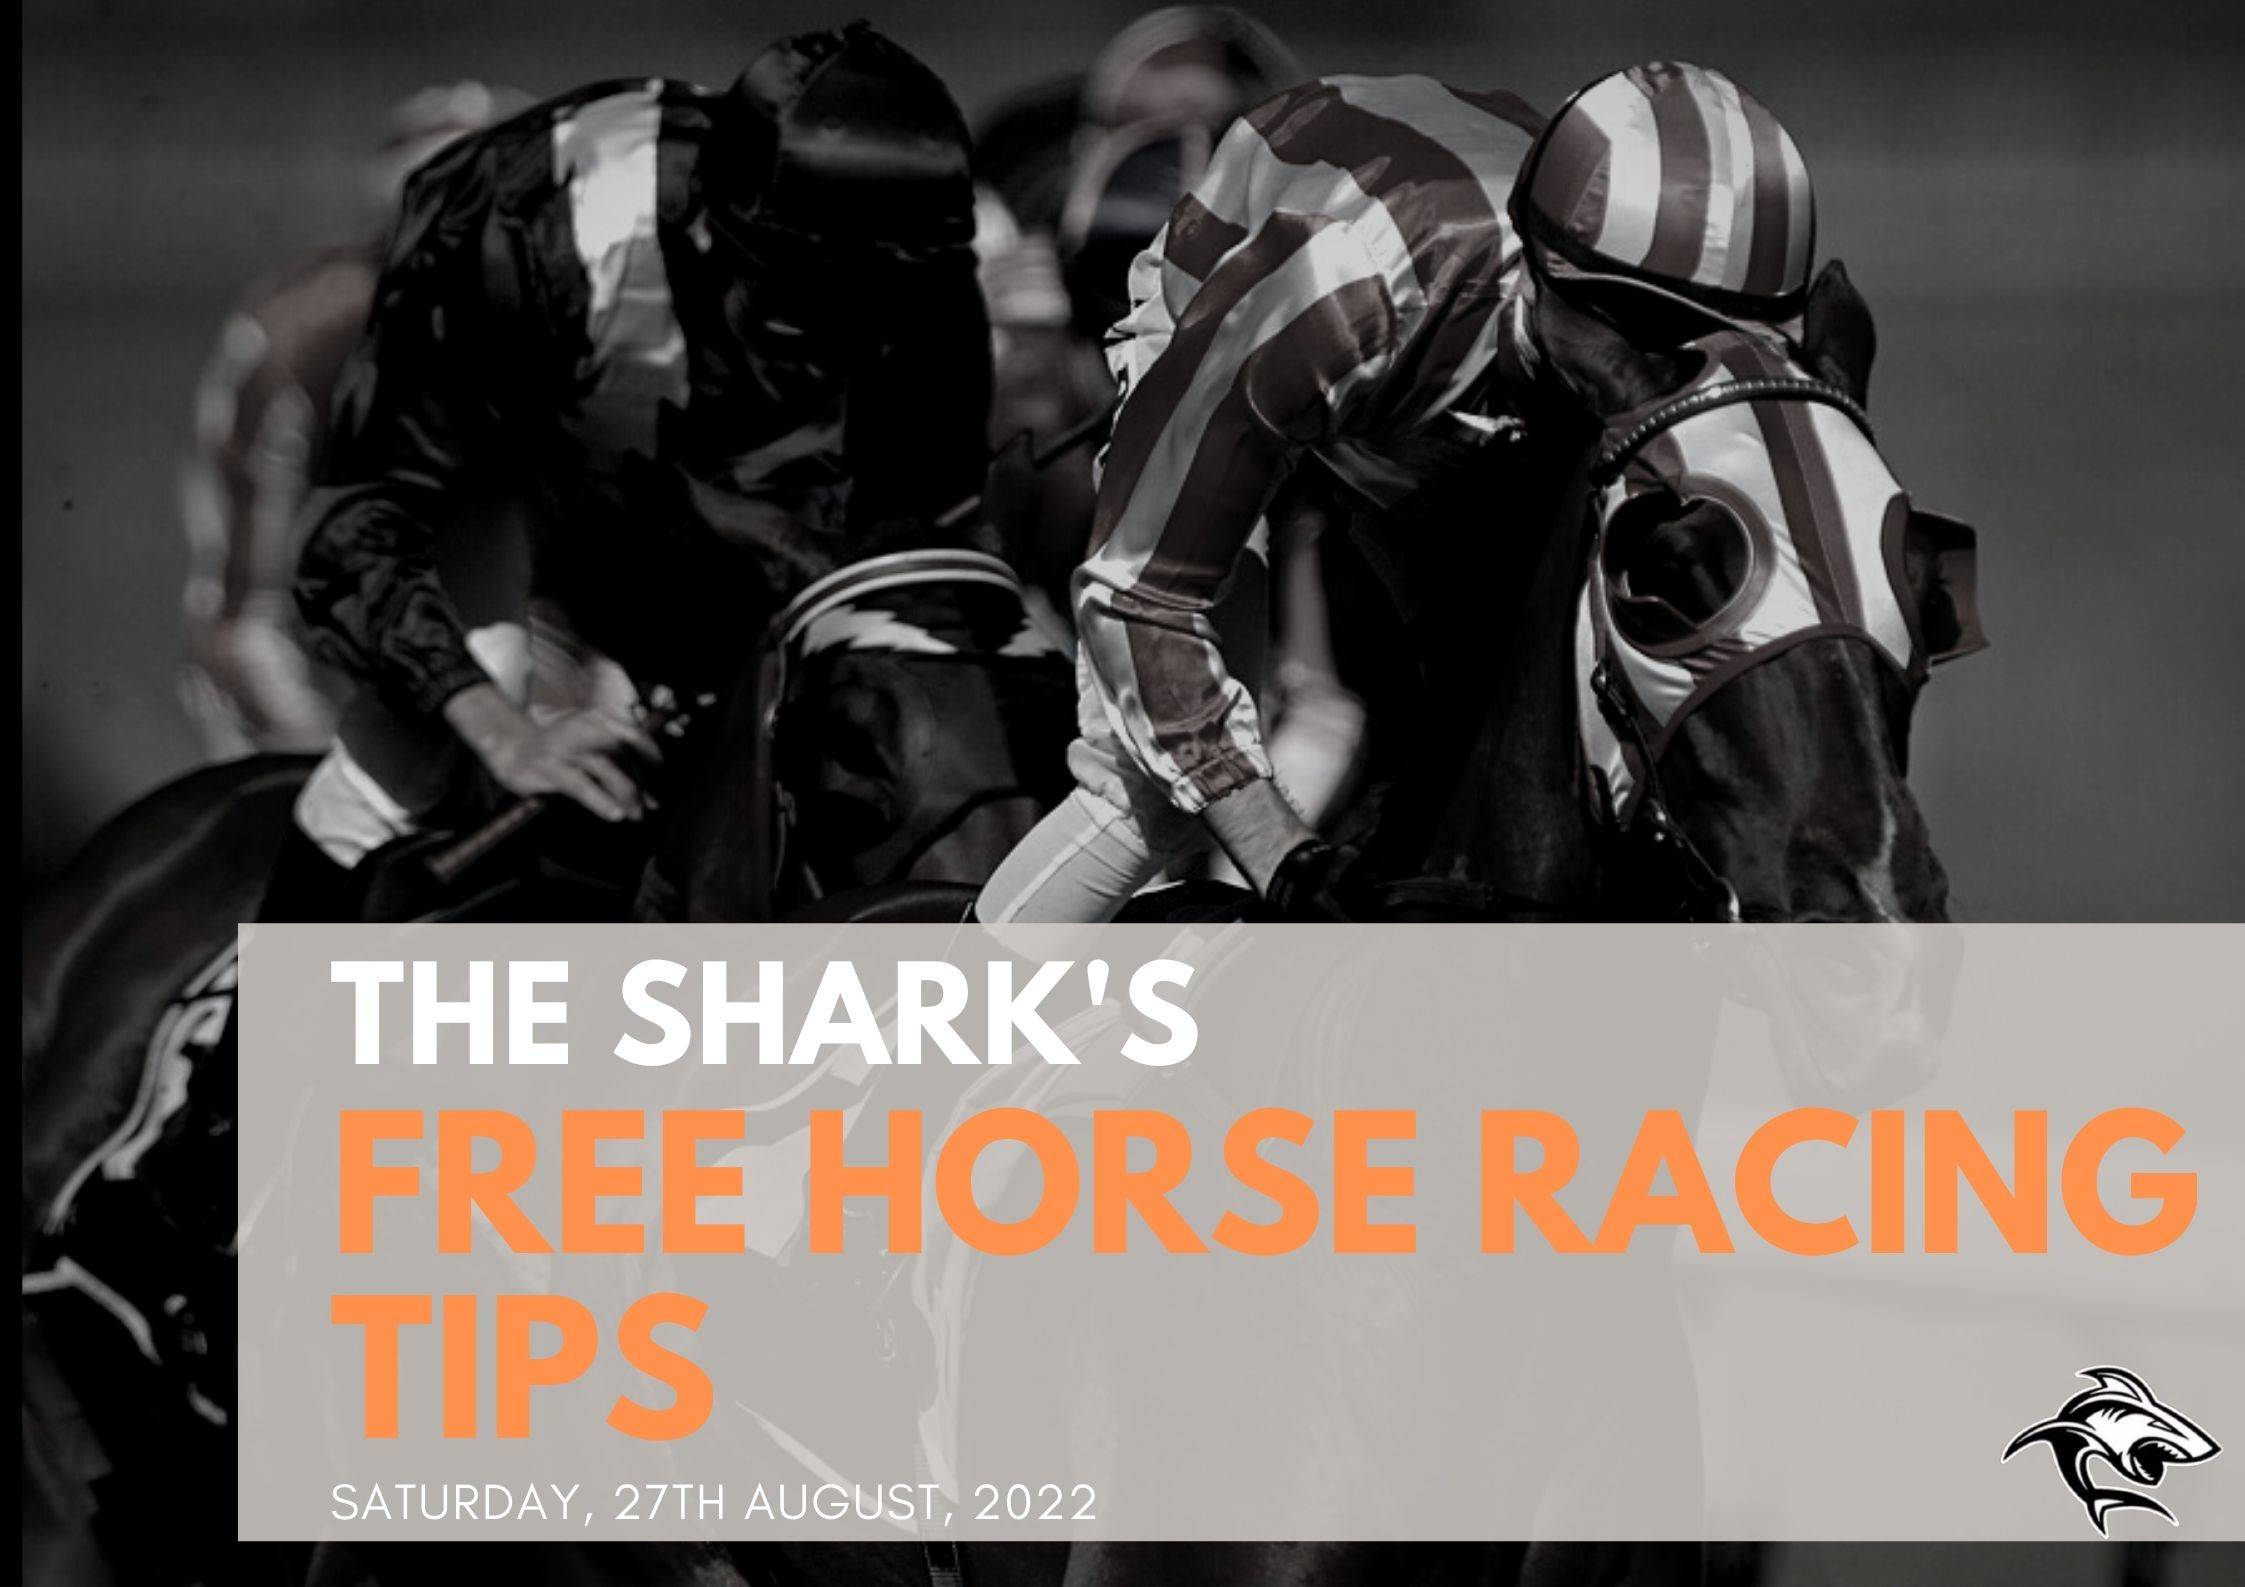 Free Horse Racing Tips - 27th Aug